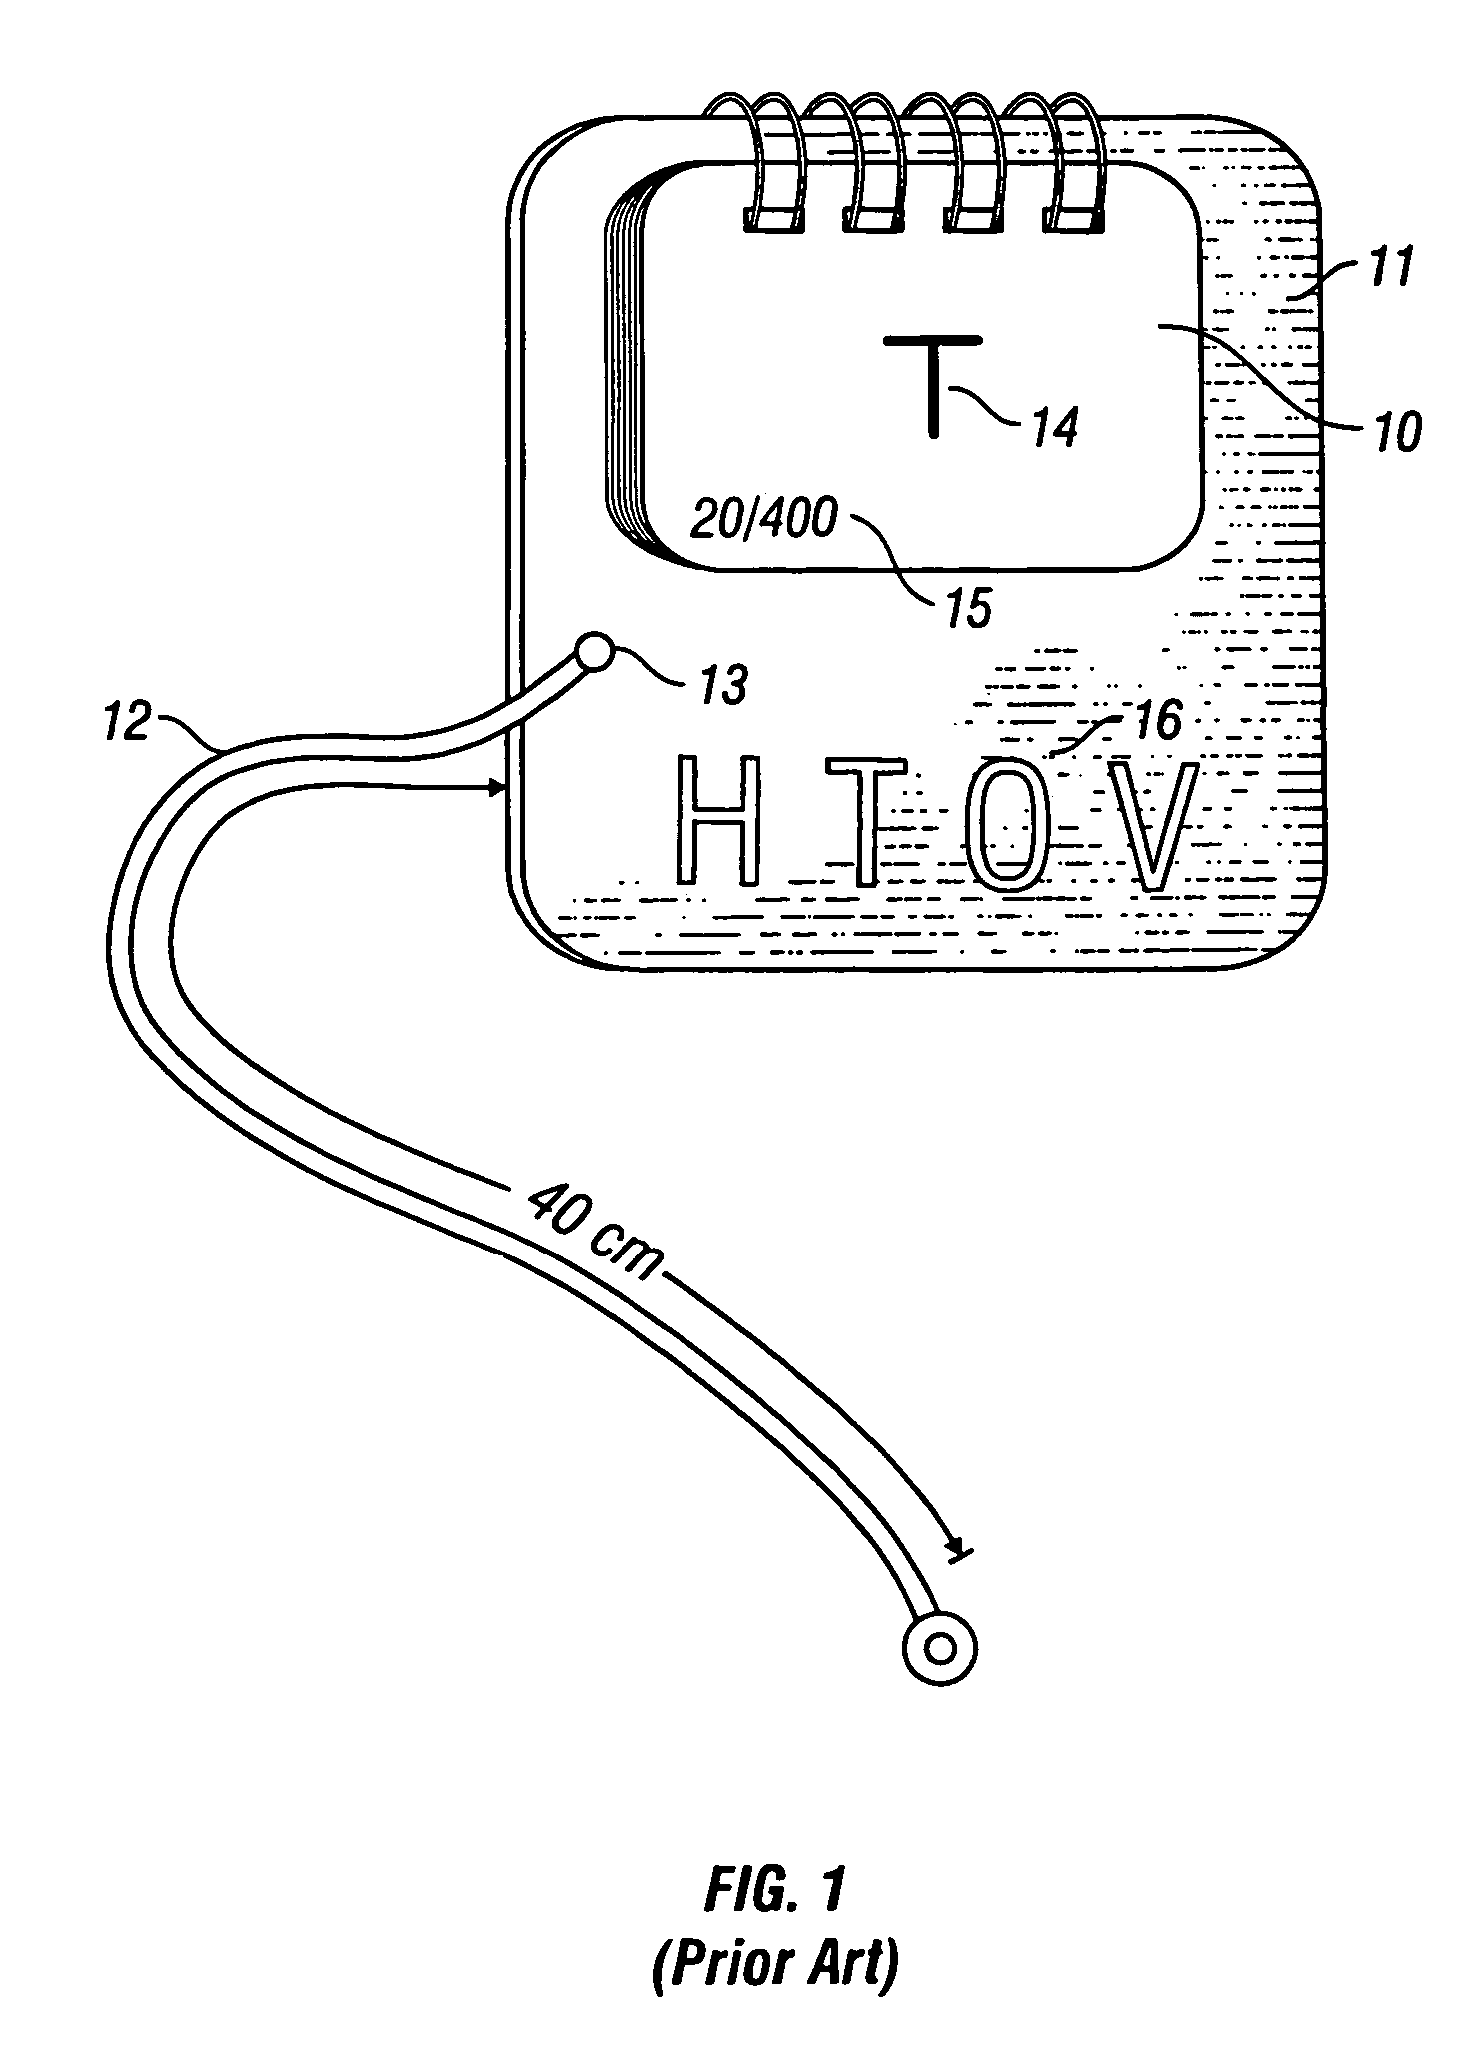 Method and apparatus for performing vision screening